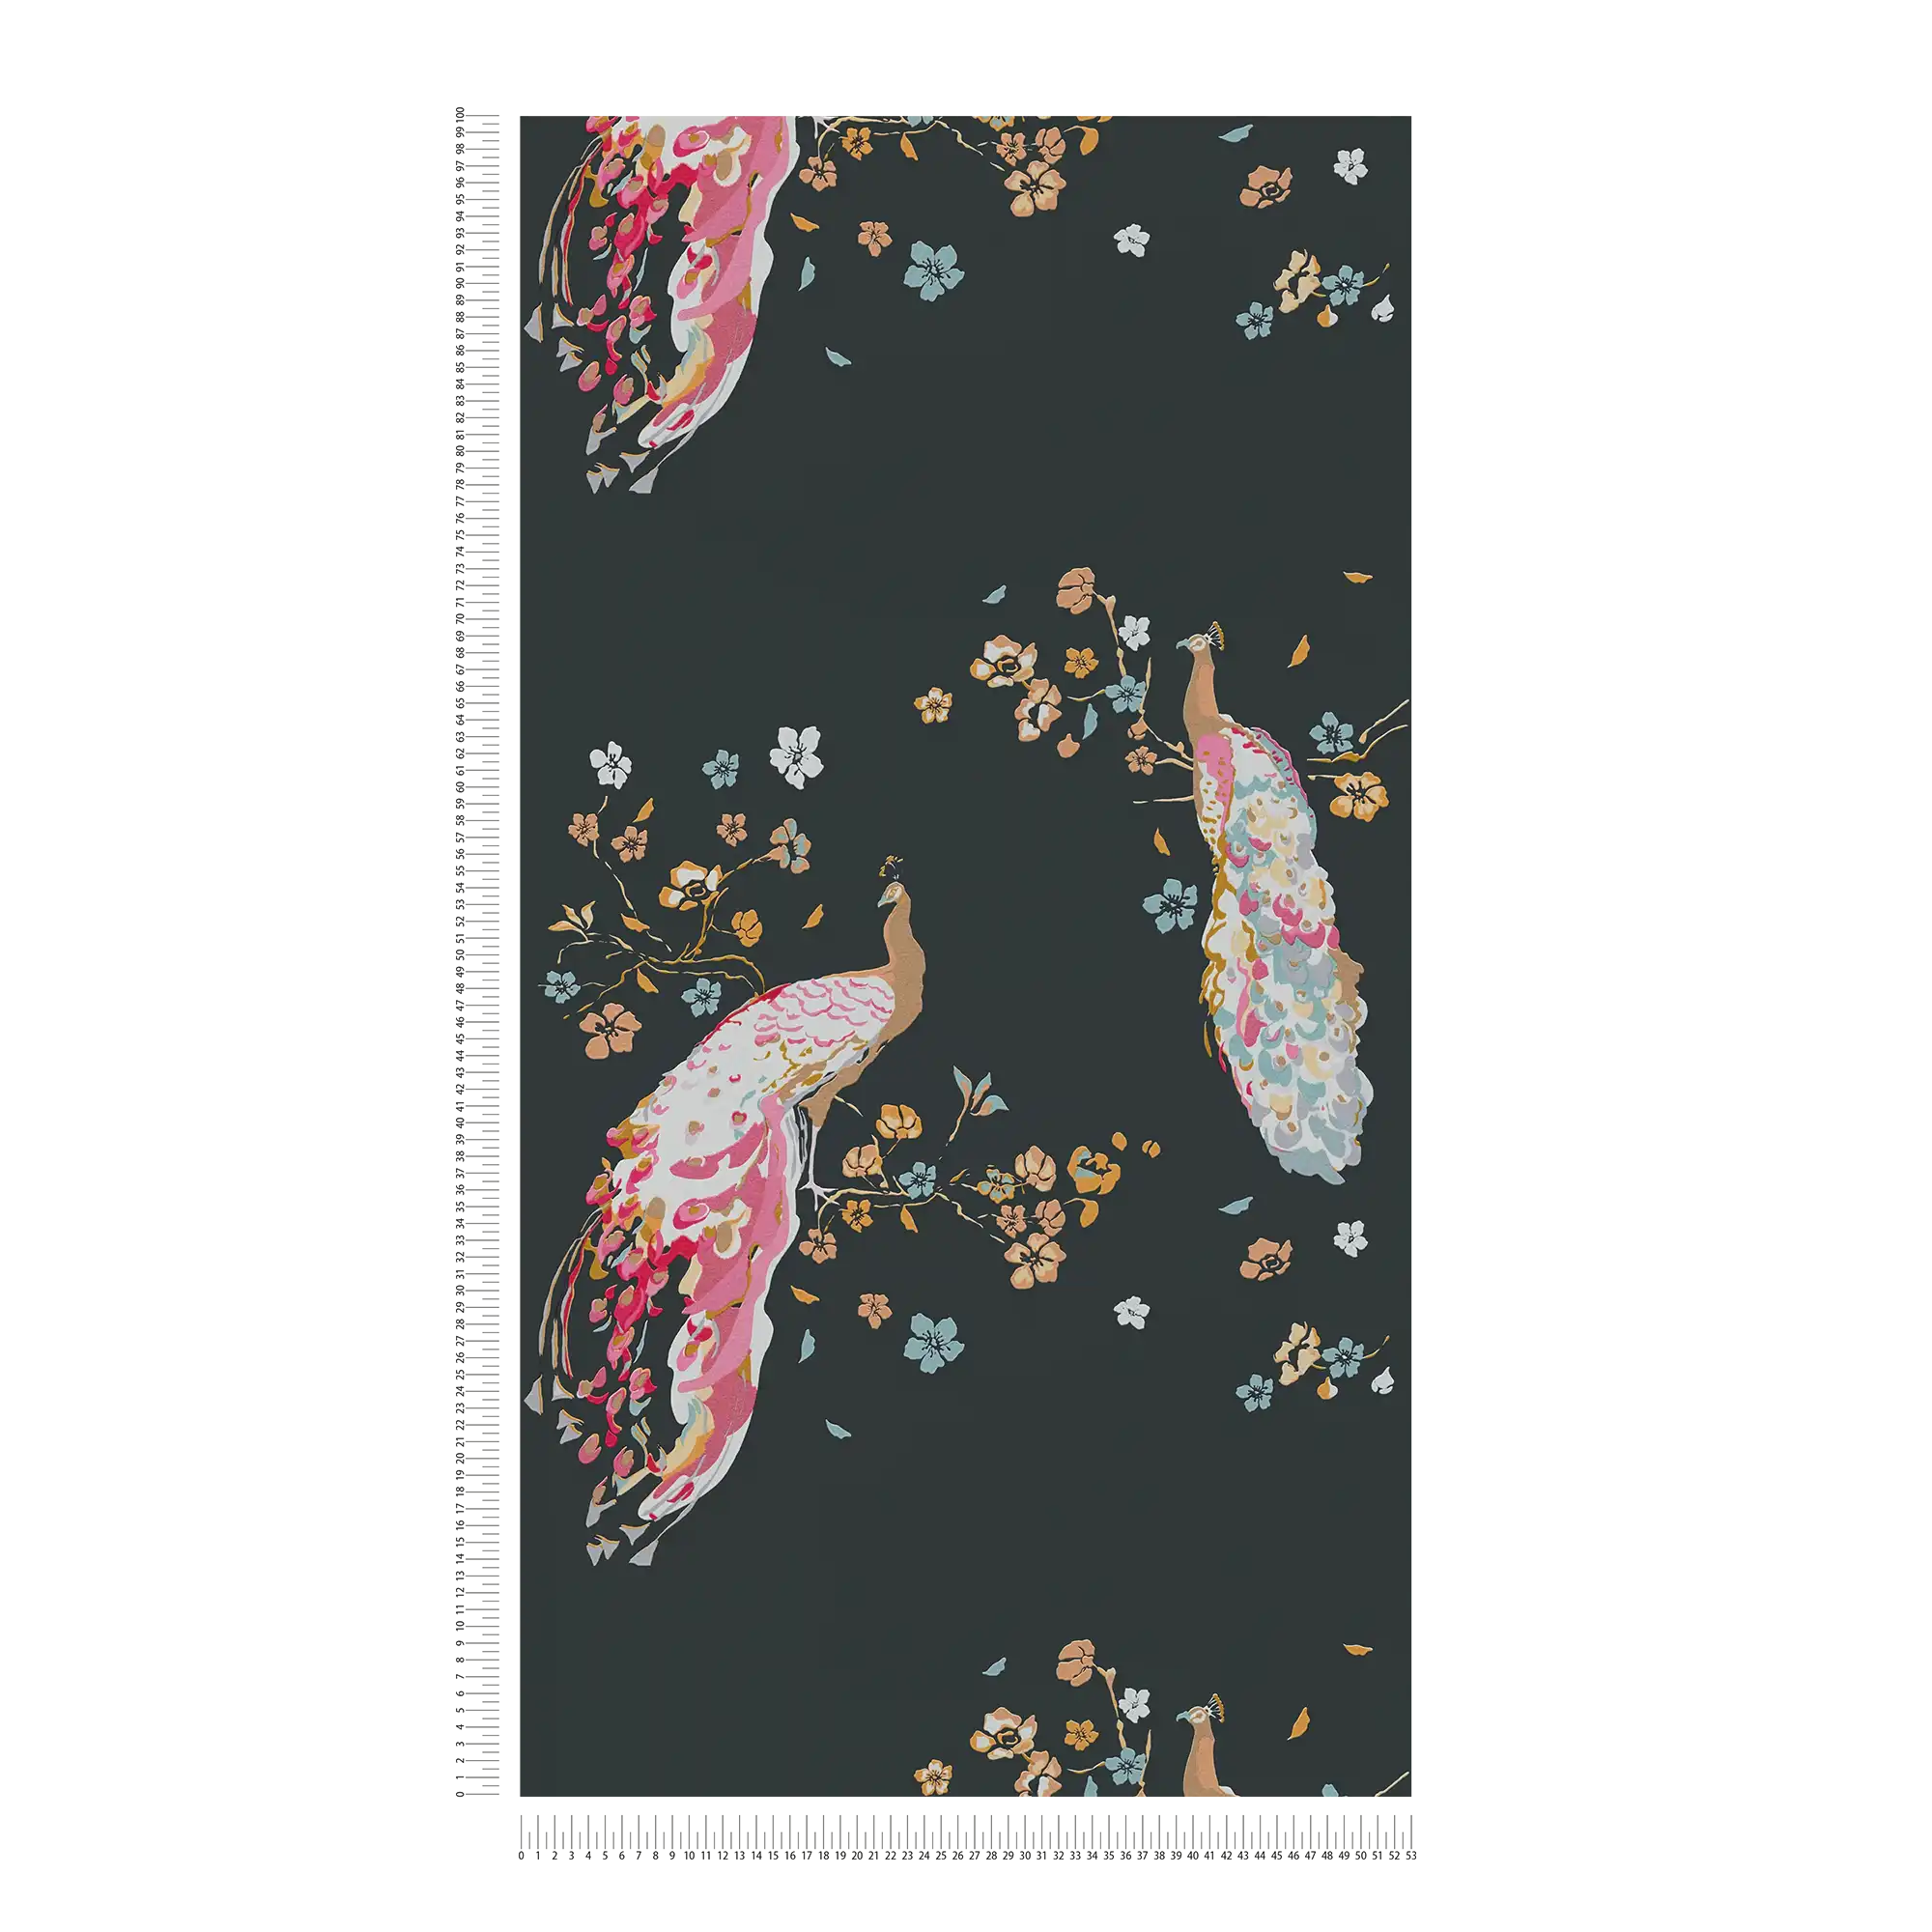             Non-woven wallpaper with peacock pattern with gloss & texture - black, gold, colourful
        